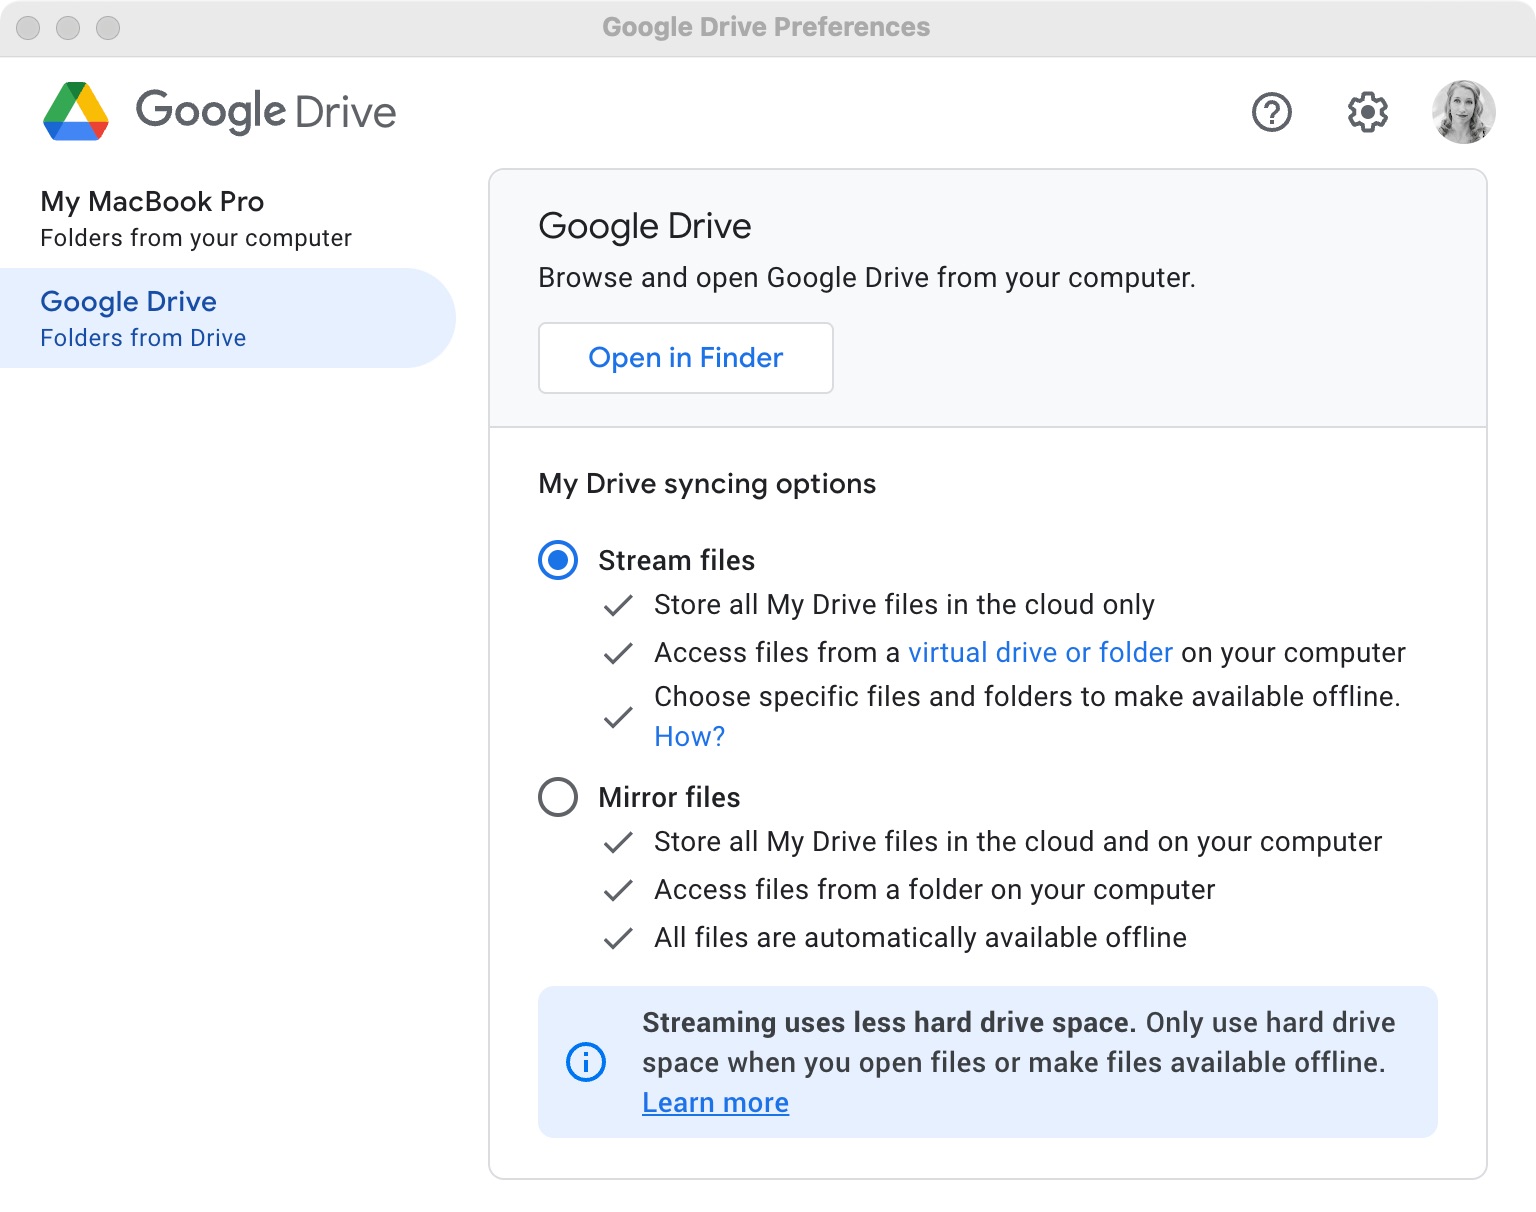 pCloud vs Google Drive: Which One is Better?